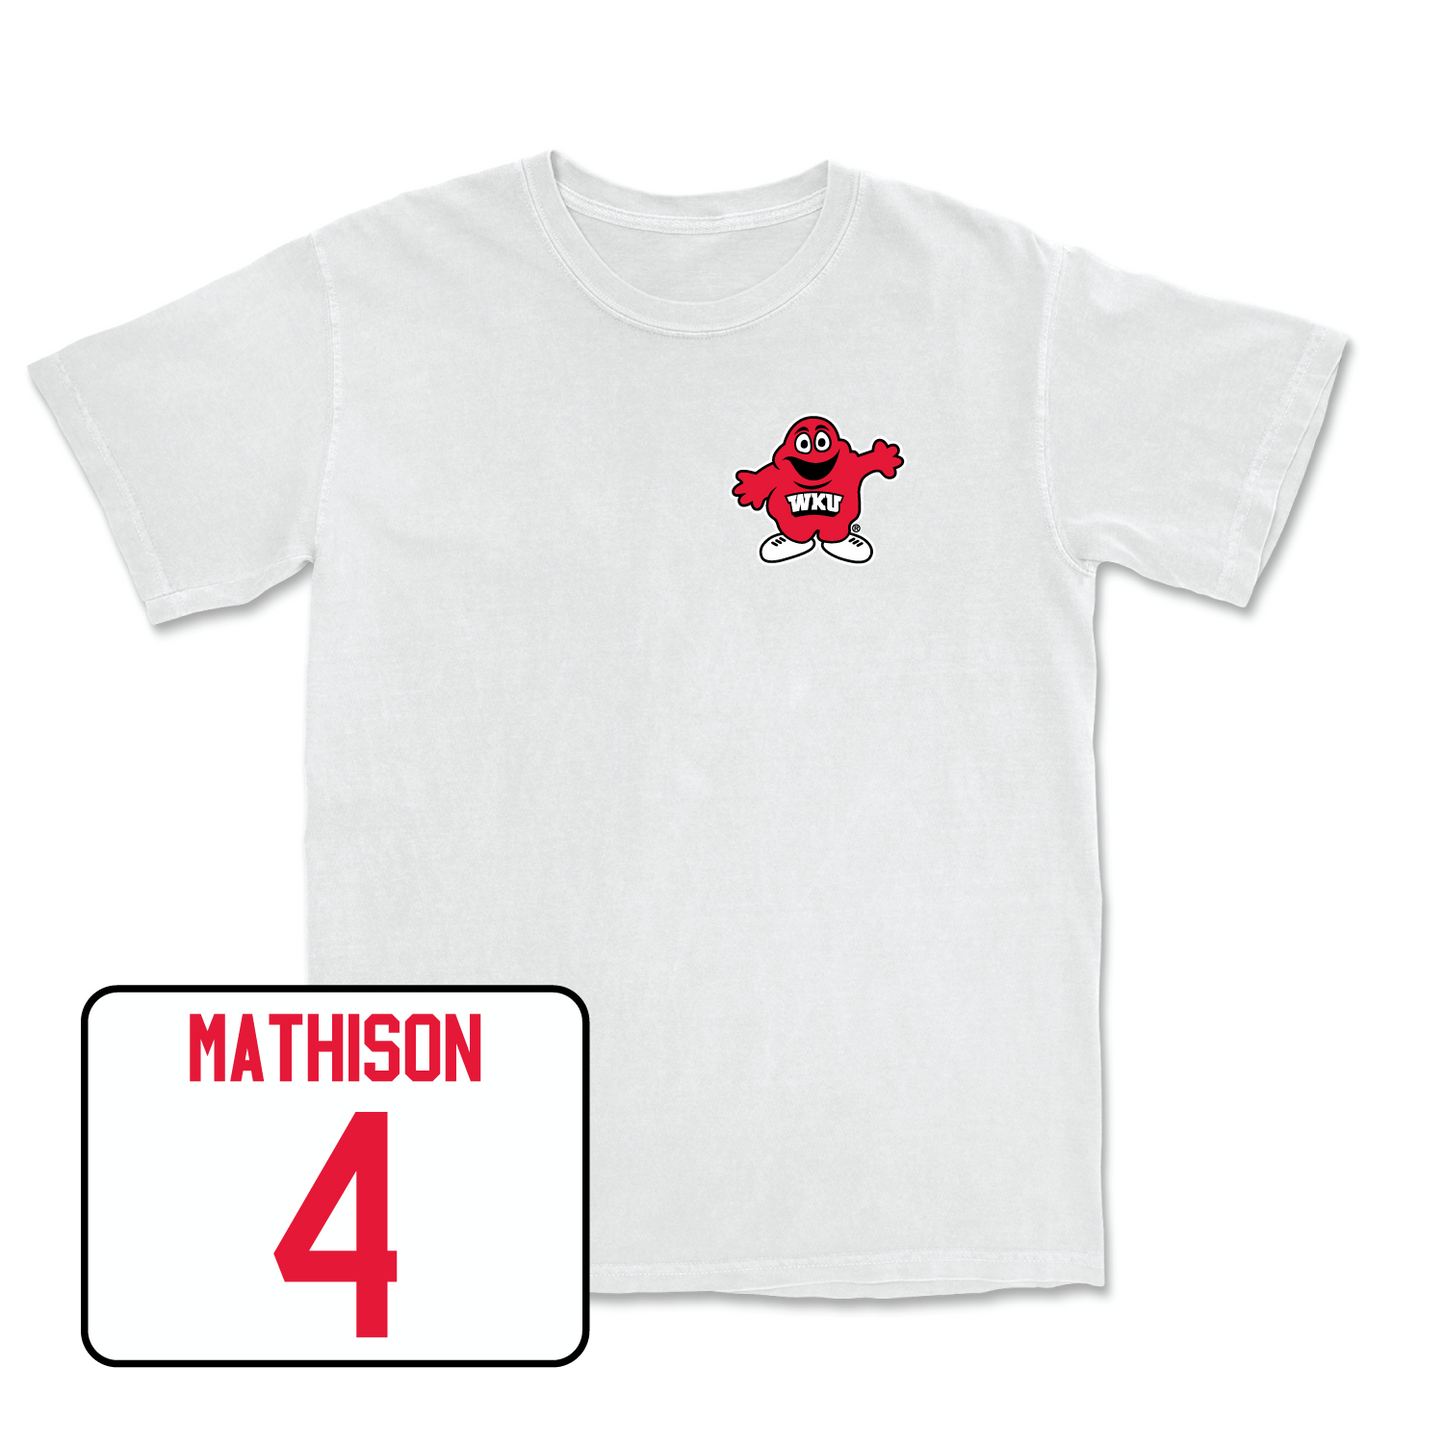 White Football Big Red Comfort Colors Tee 5 4X-Large / Michael Mathison | #4